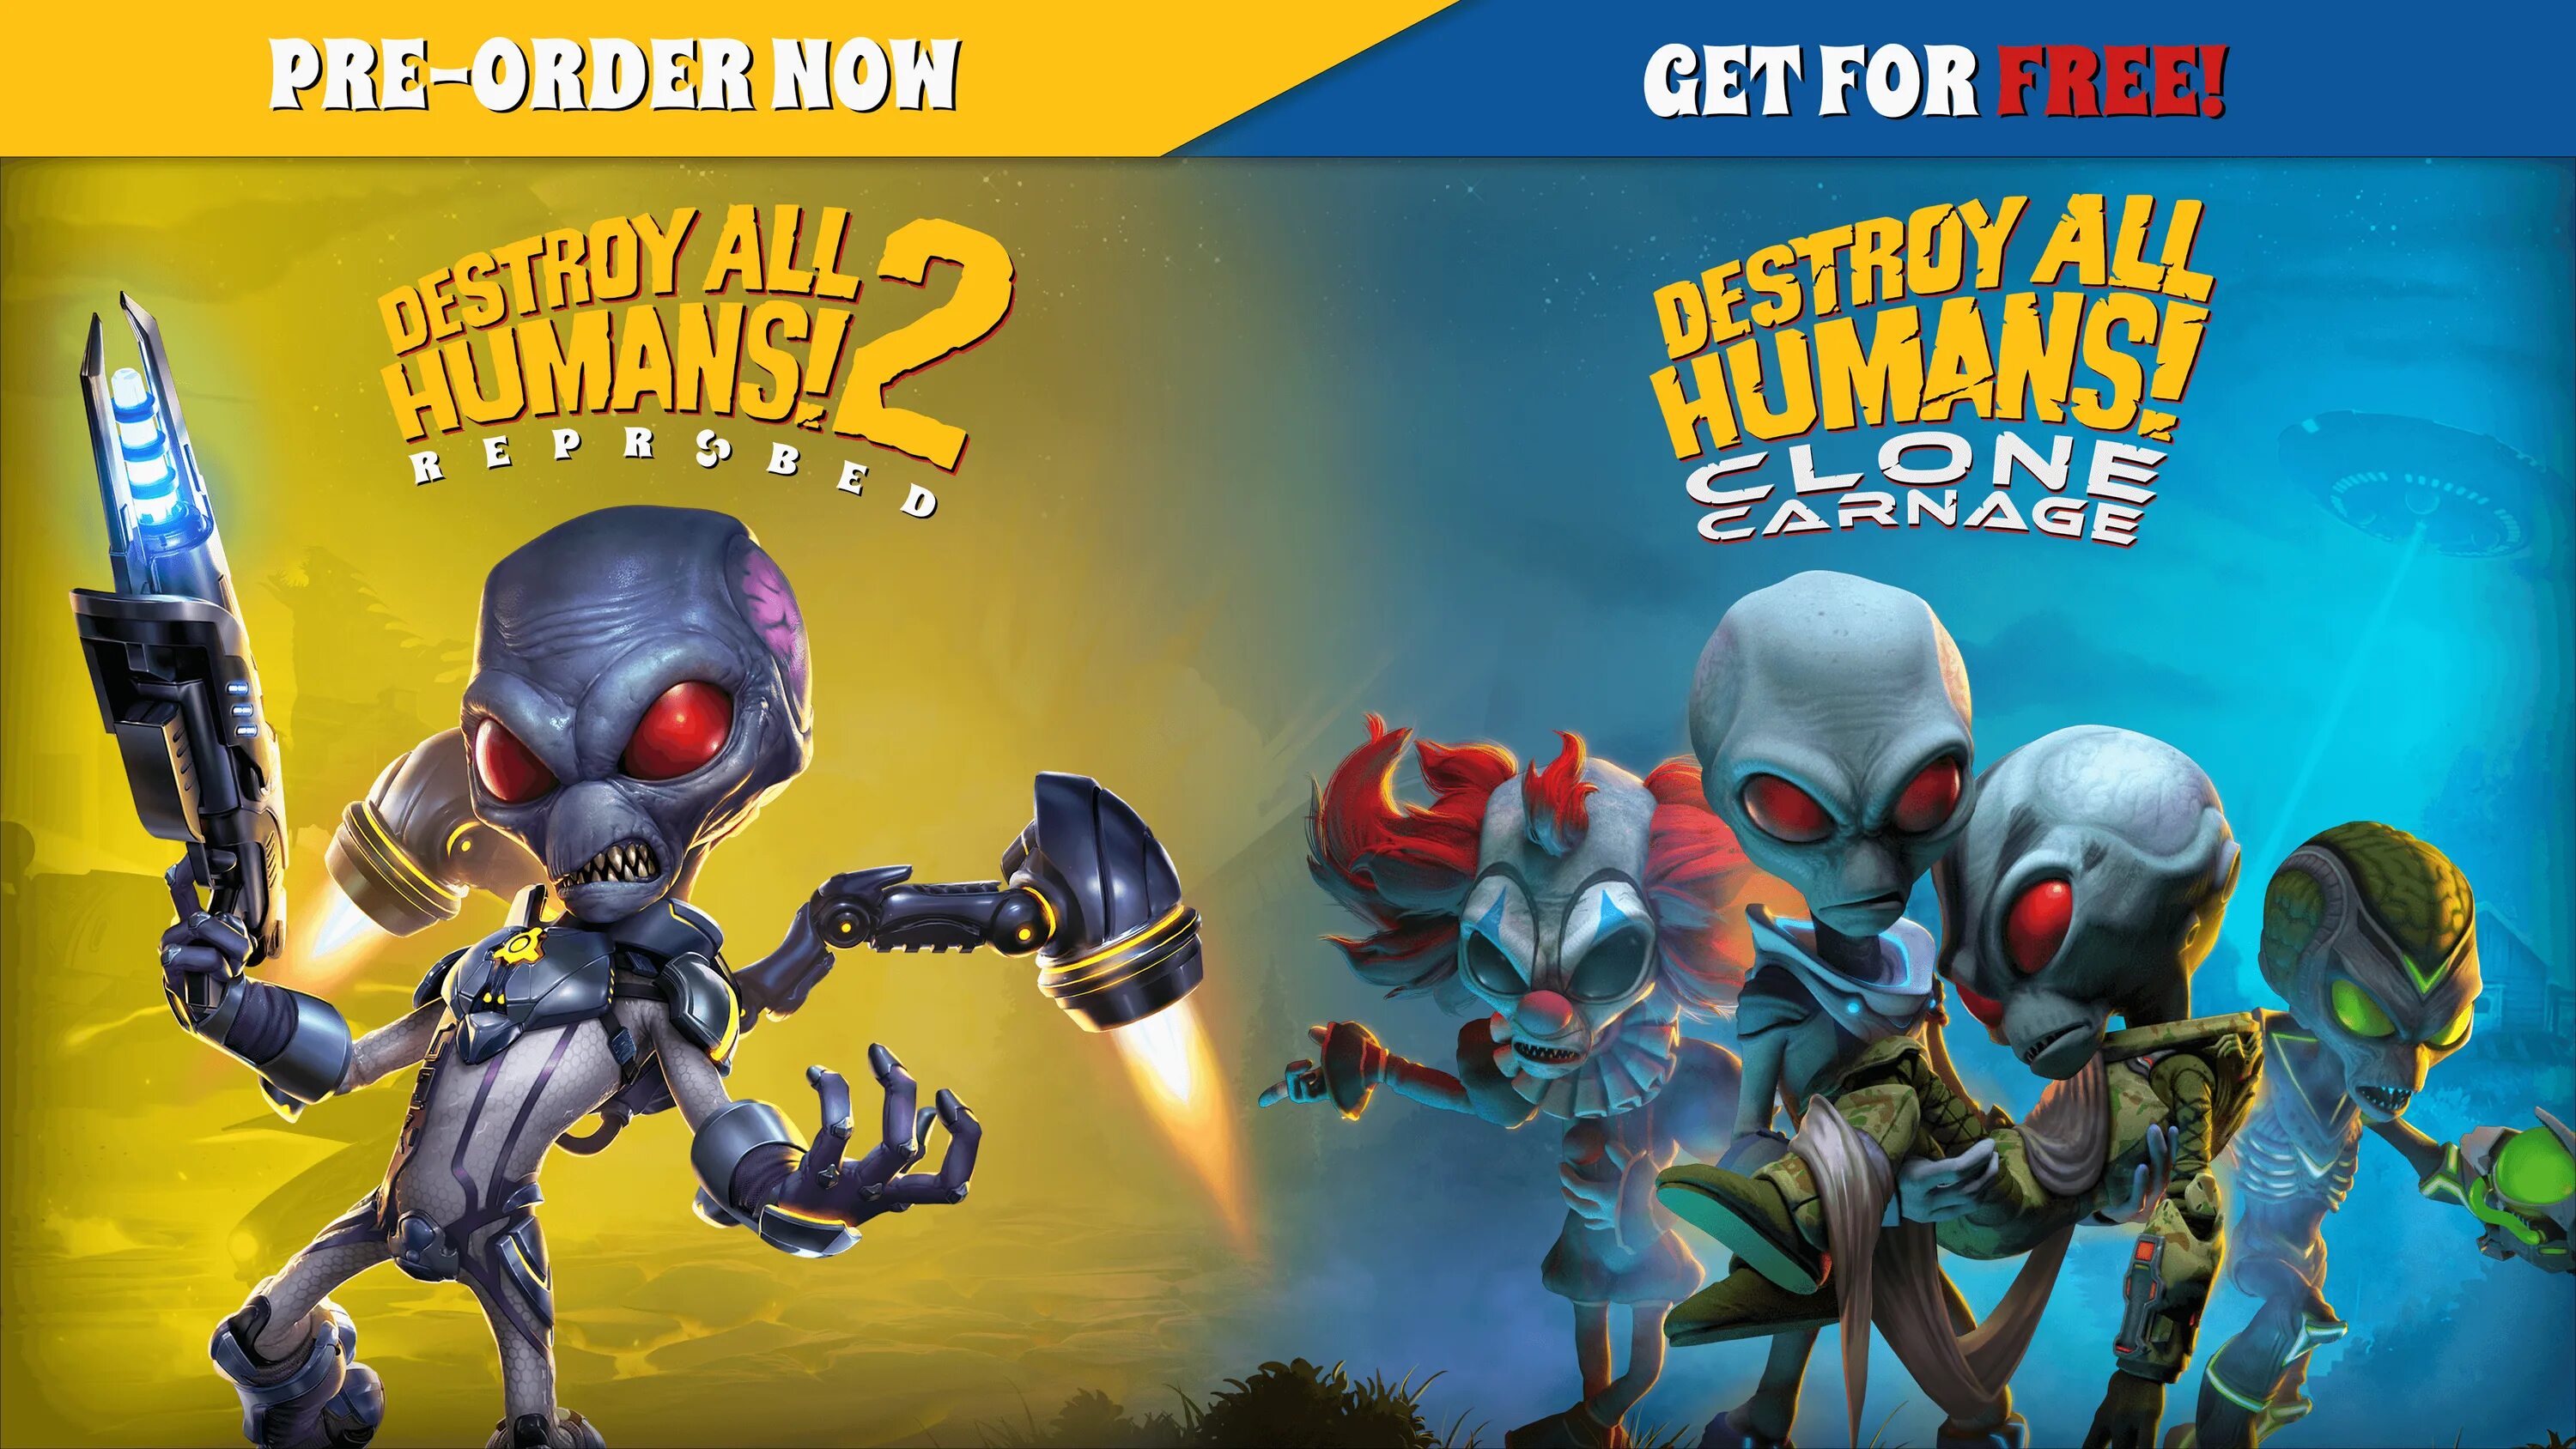 Destroy all Humans 2 reprobed. Destroy all Humans!. Крипто destroy all Humans. Игра destroy all Humans! 2 Reprobed. All humans 2 reprobed